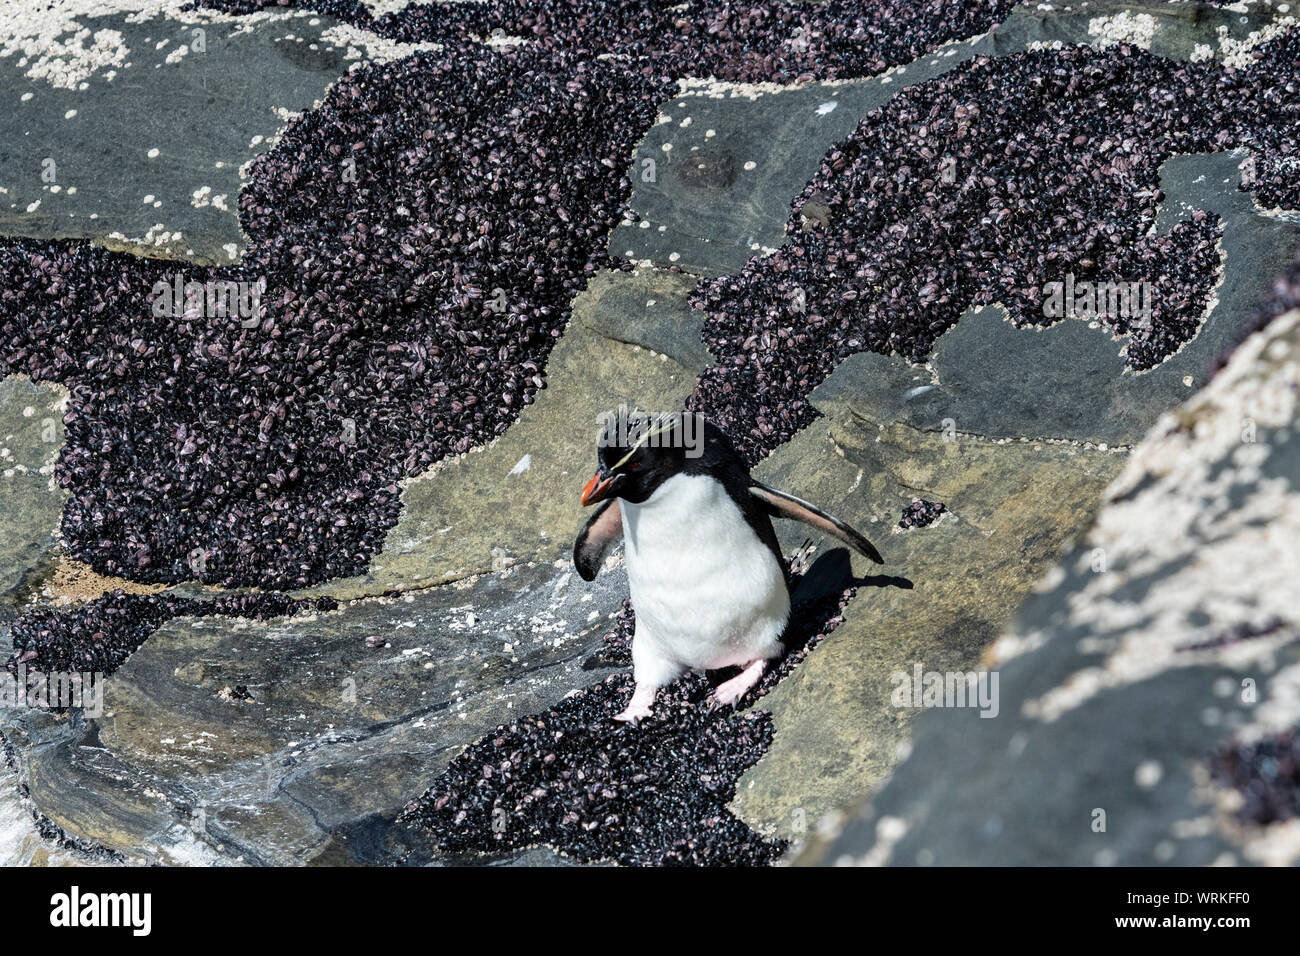 Cute, adult Rockhopper Penguin, Eudyptes chrysocome, on the cliffs at the Neck, Saunders Island, in the Falkland Islands, South Atlantic Ocean Stock Photo